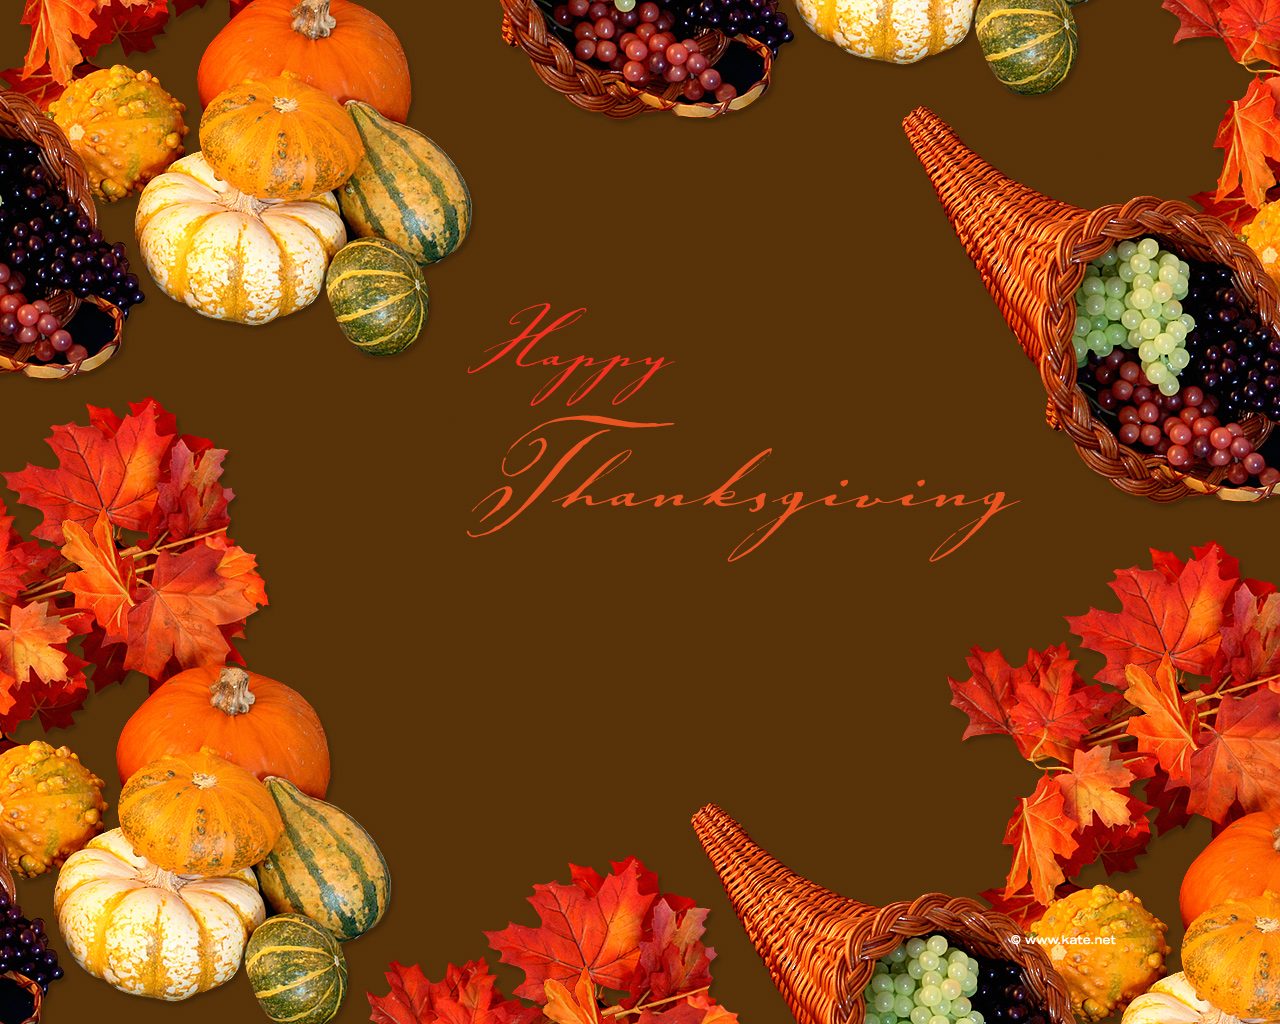     Saw I Learned I Share      Free Thanksgiving Powerpoint Backgrounds